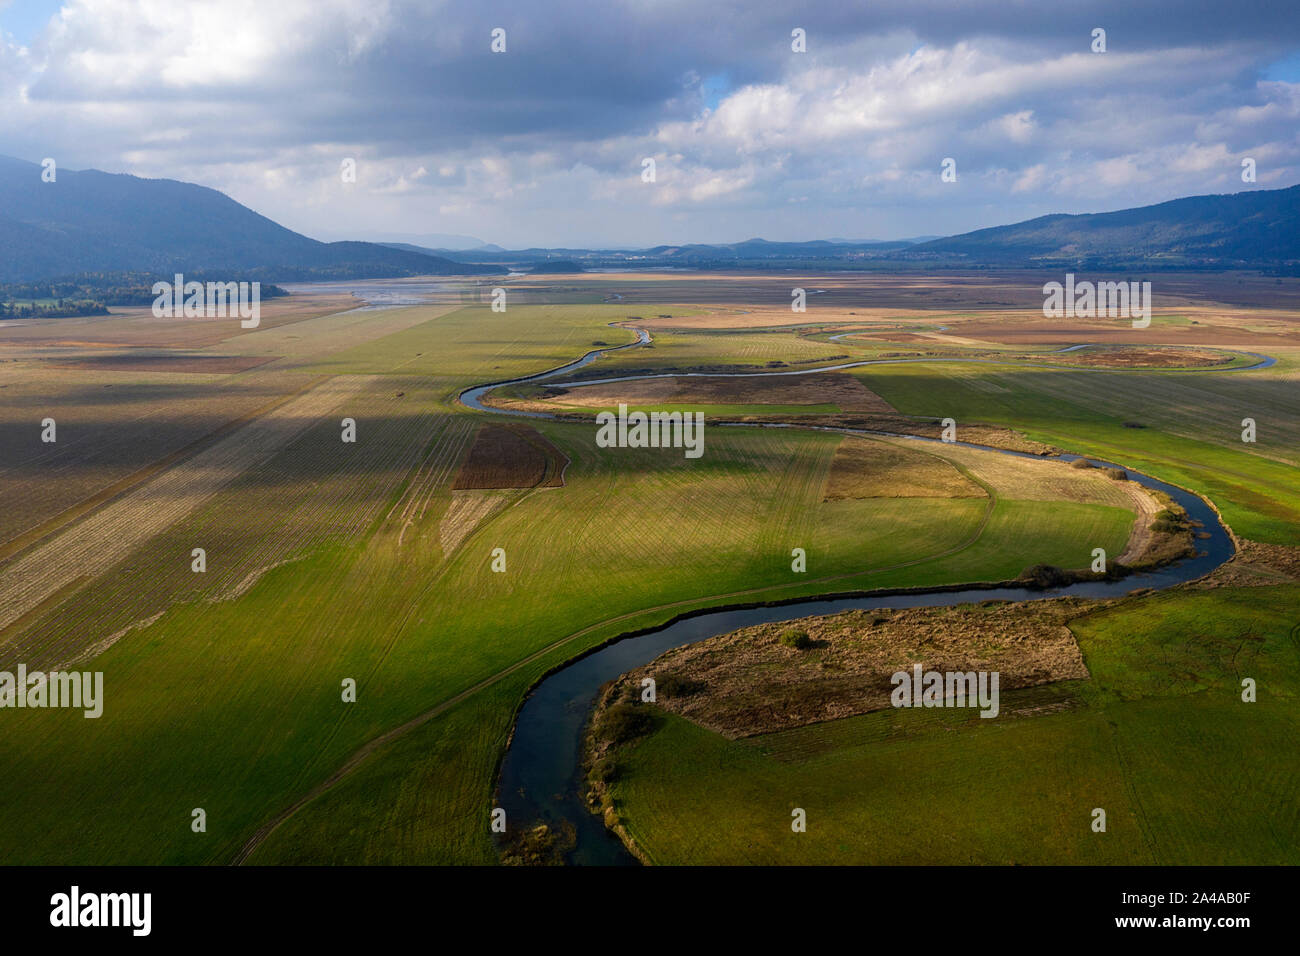 Top scenic Aerial view of tributary that flows into Cerknica Lake, Slovenia Stock Photo